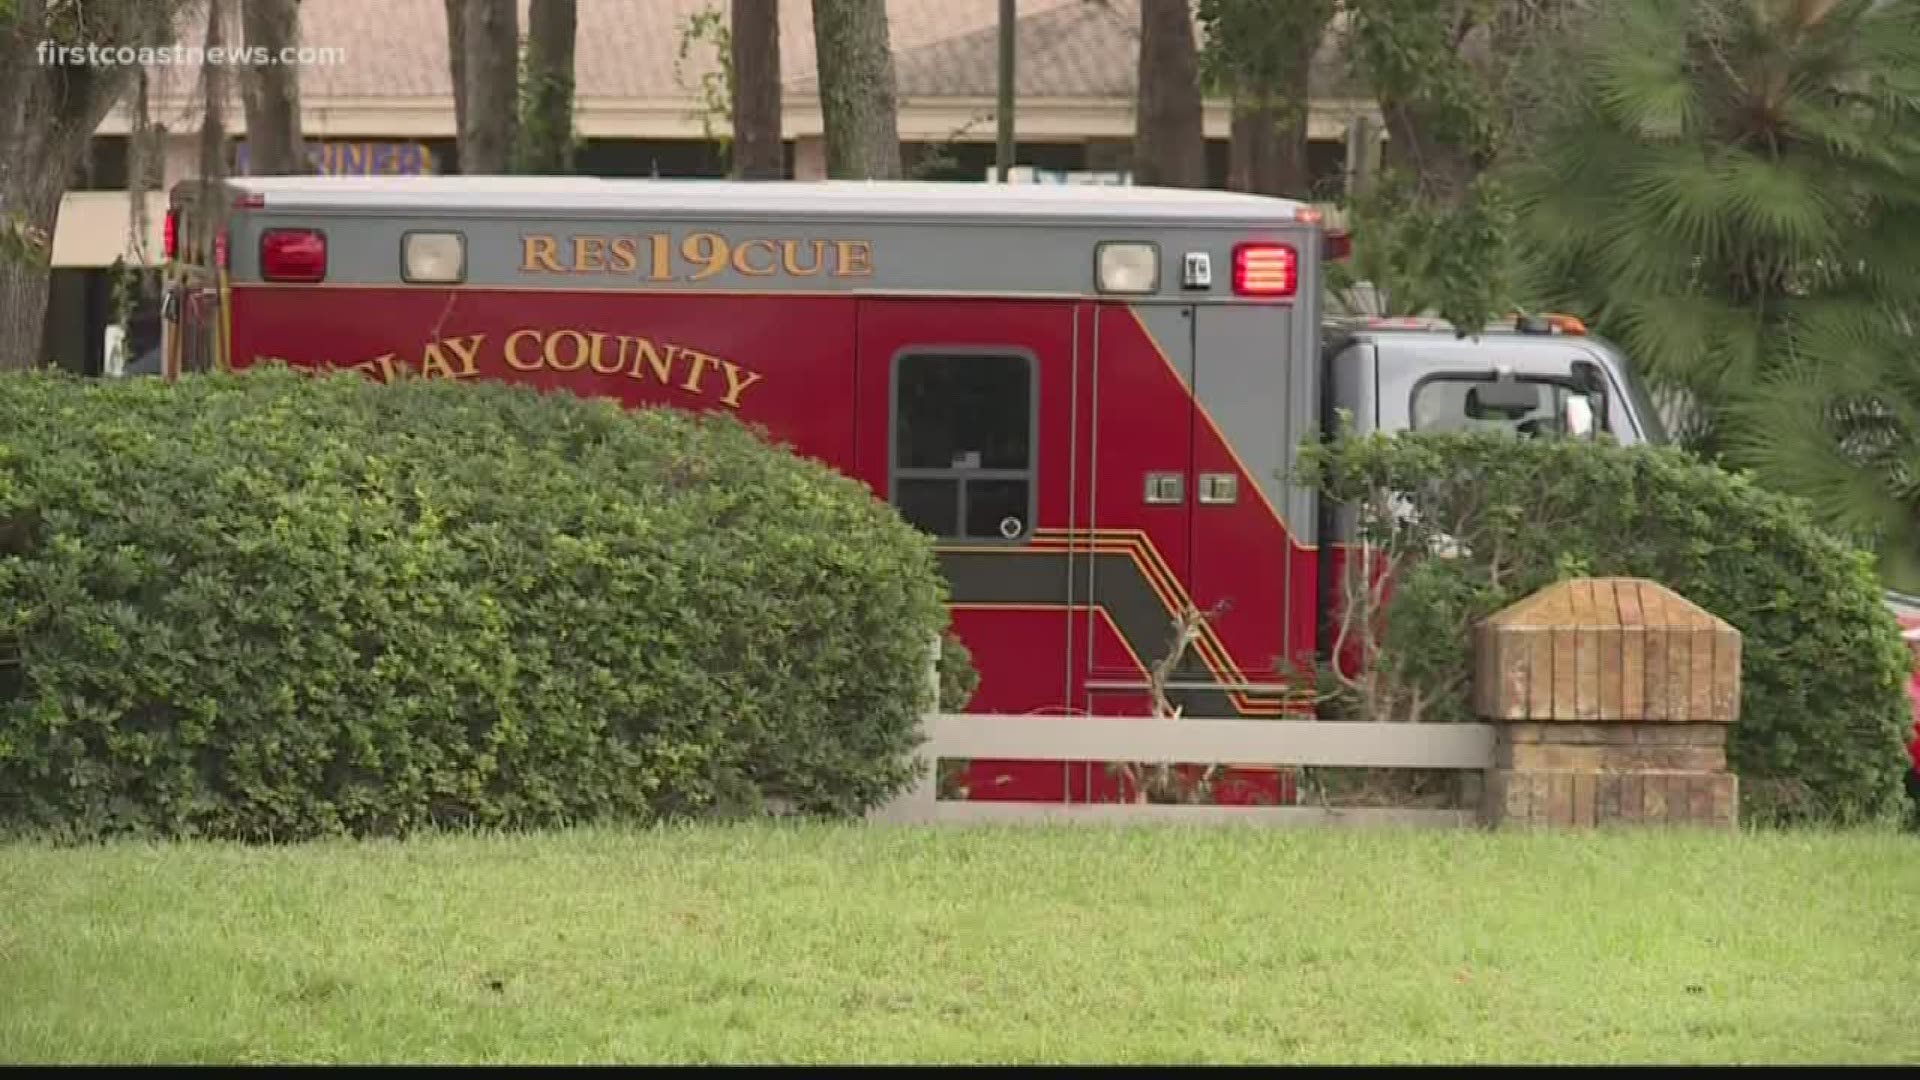 After a call alleging that a man had killed two people and was going to kill himself came into the Orange Park Police Department, police responded to a residence but no one was home.